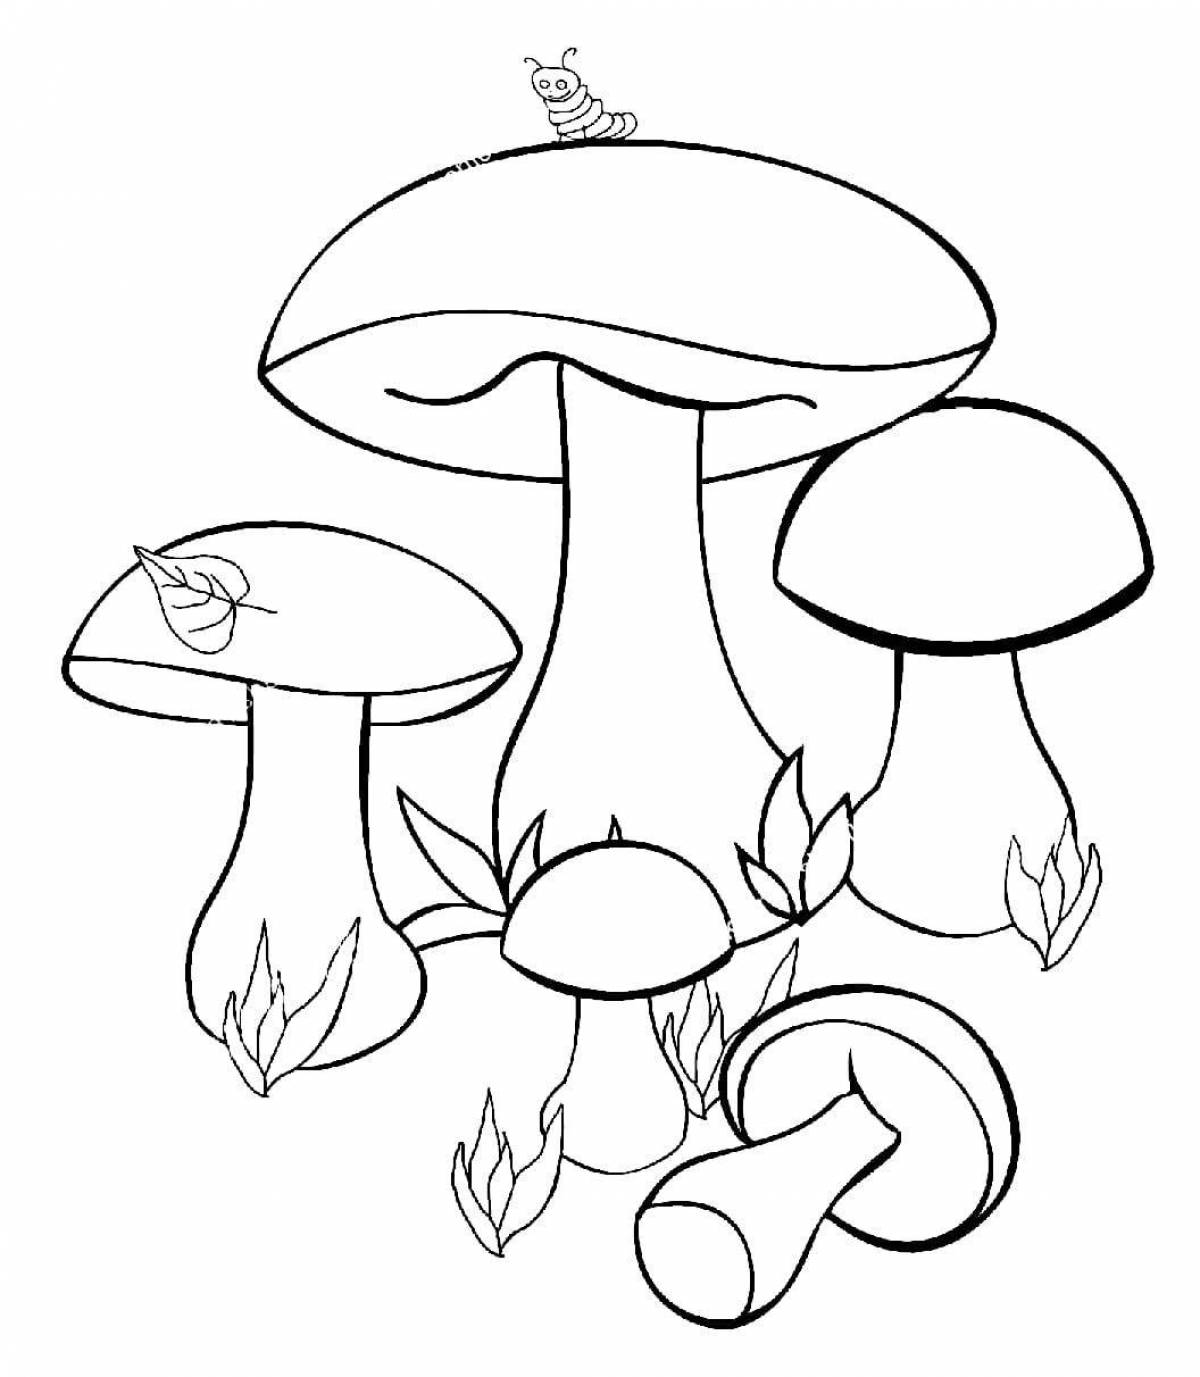 Creative mushroom coloring book for 4-5 year olds